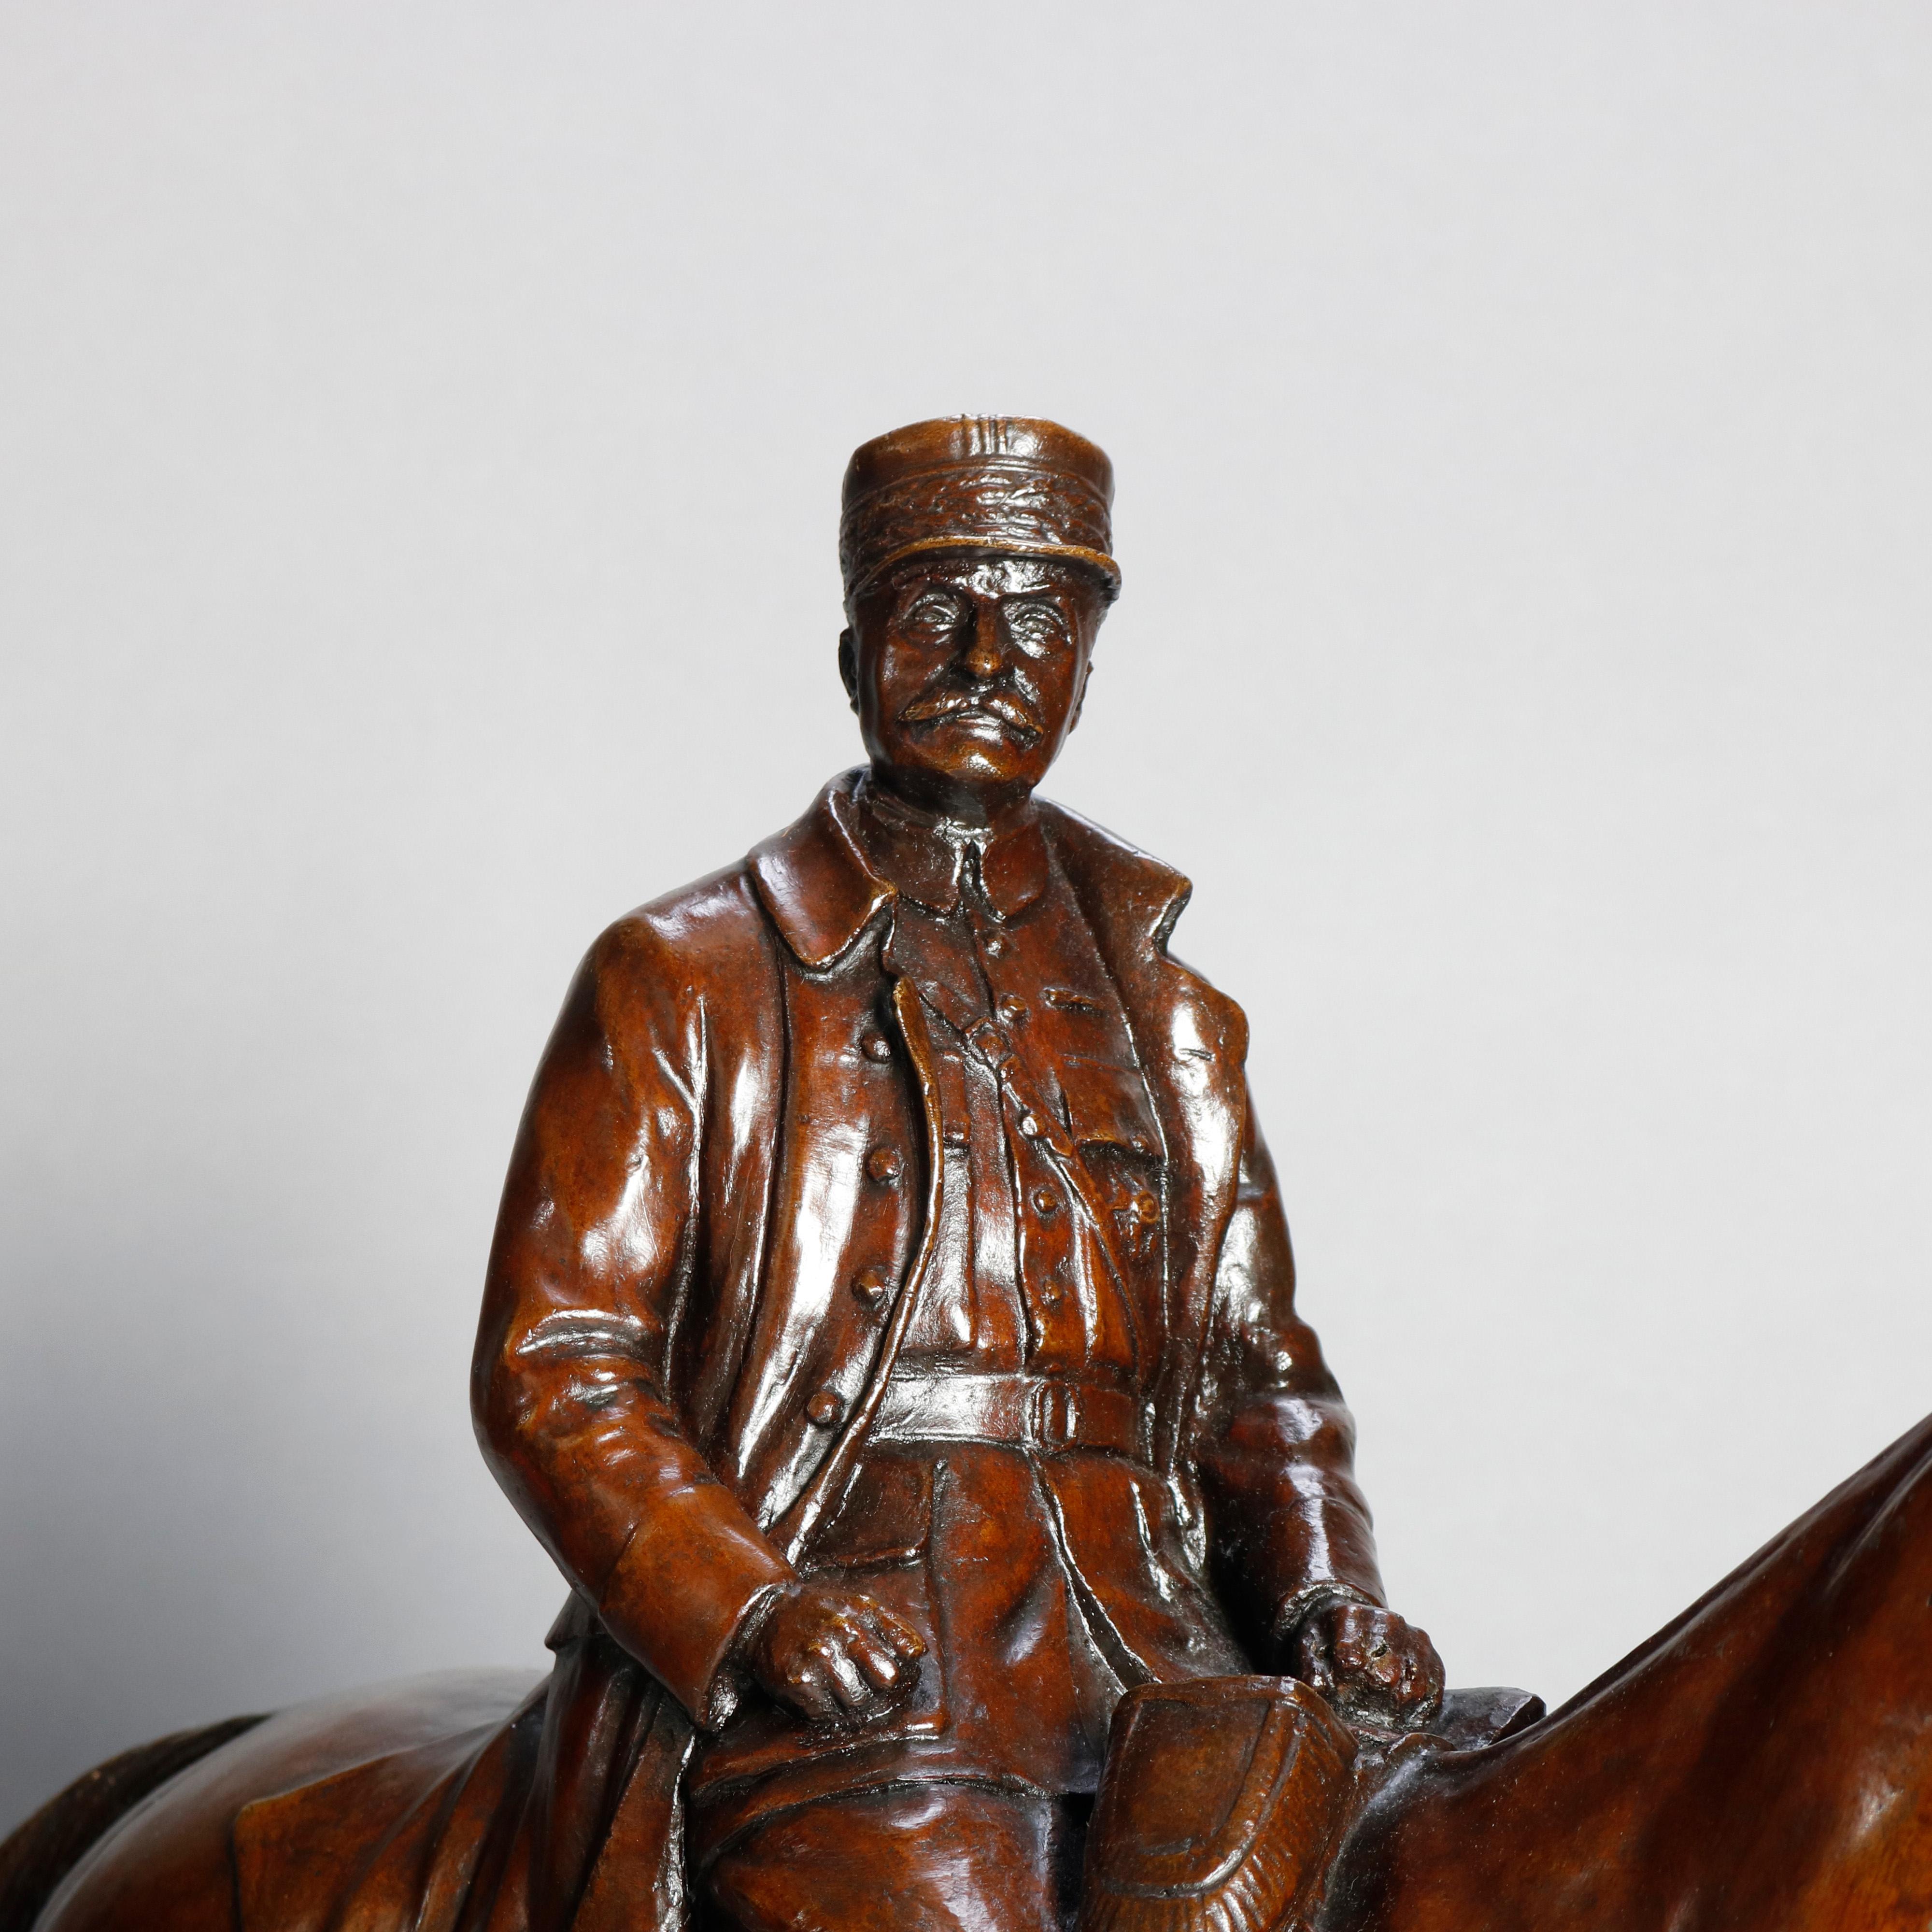 An equestrian portrait bronze depicts Marshal Ferdinand Foch in military uniform and seated on horse back, after Malissard, Valsuani foundry mark as photographed, seated on marble base, circa 1924.

Measures: 22